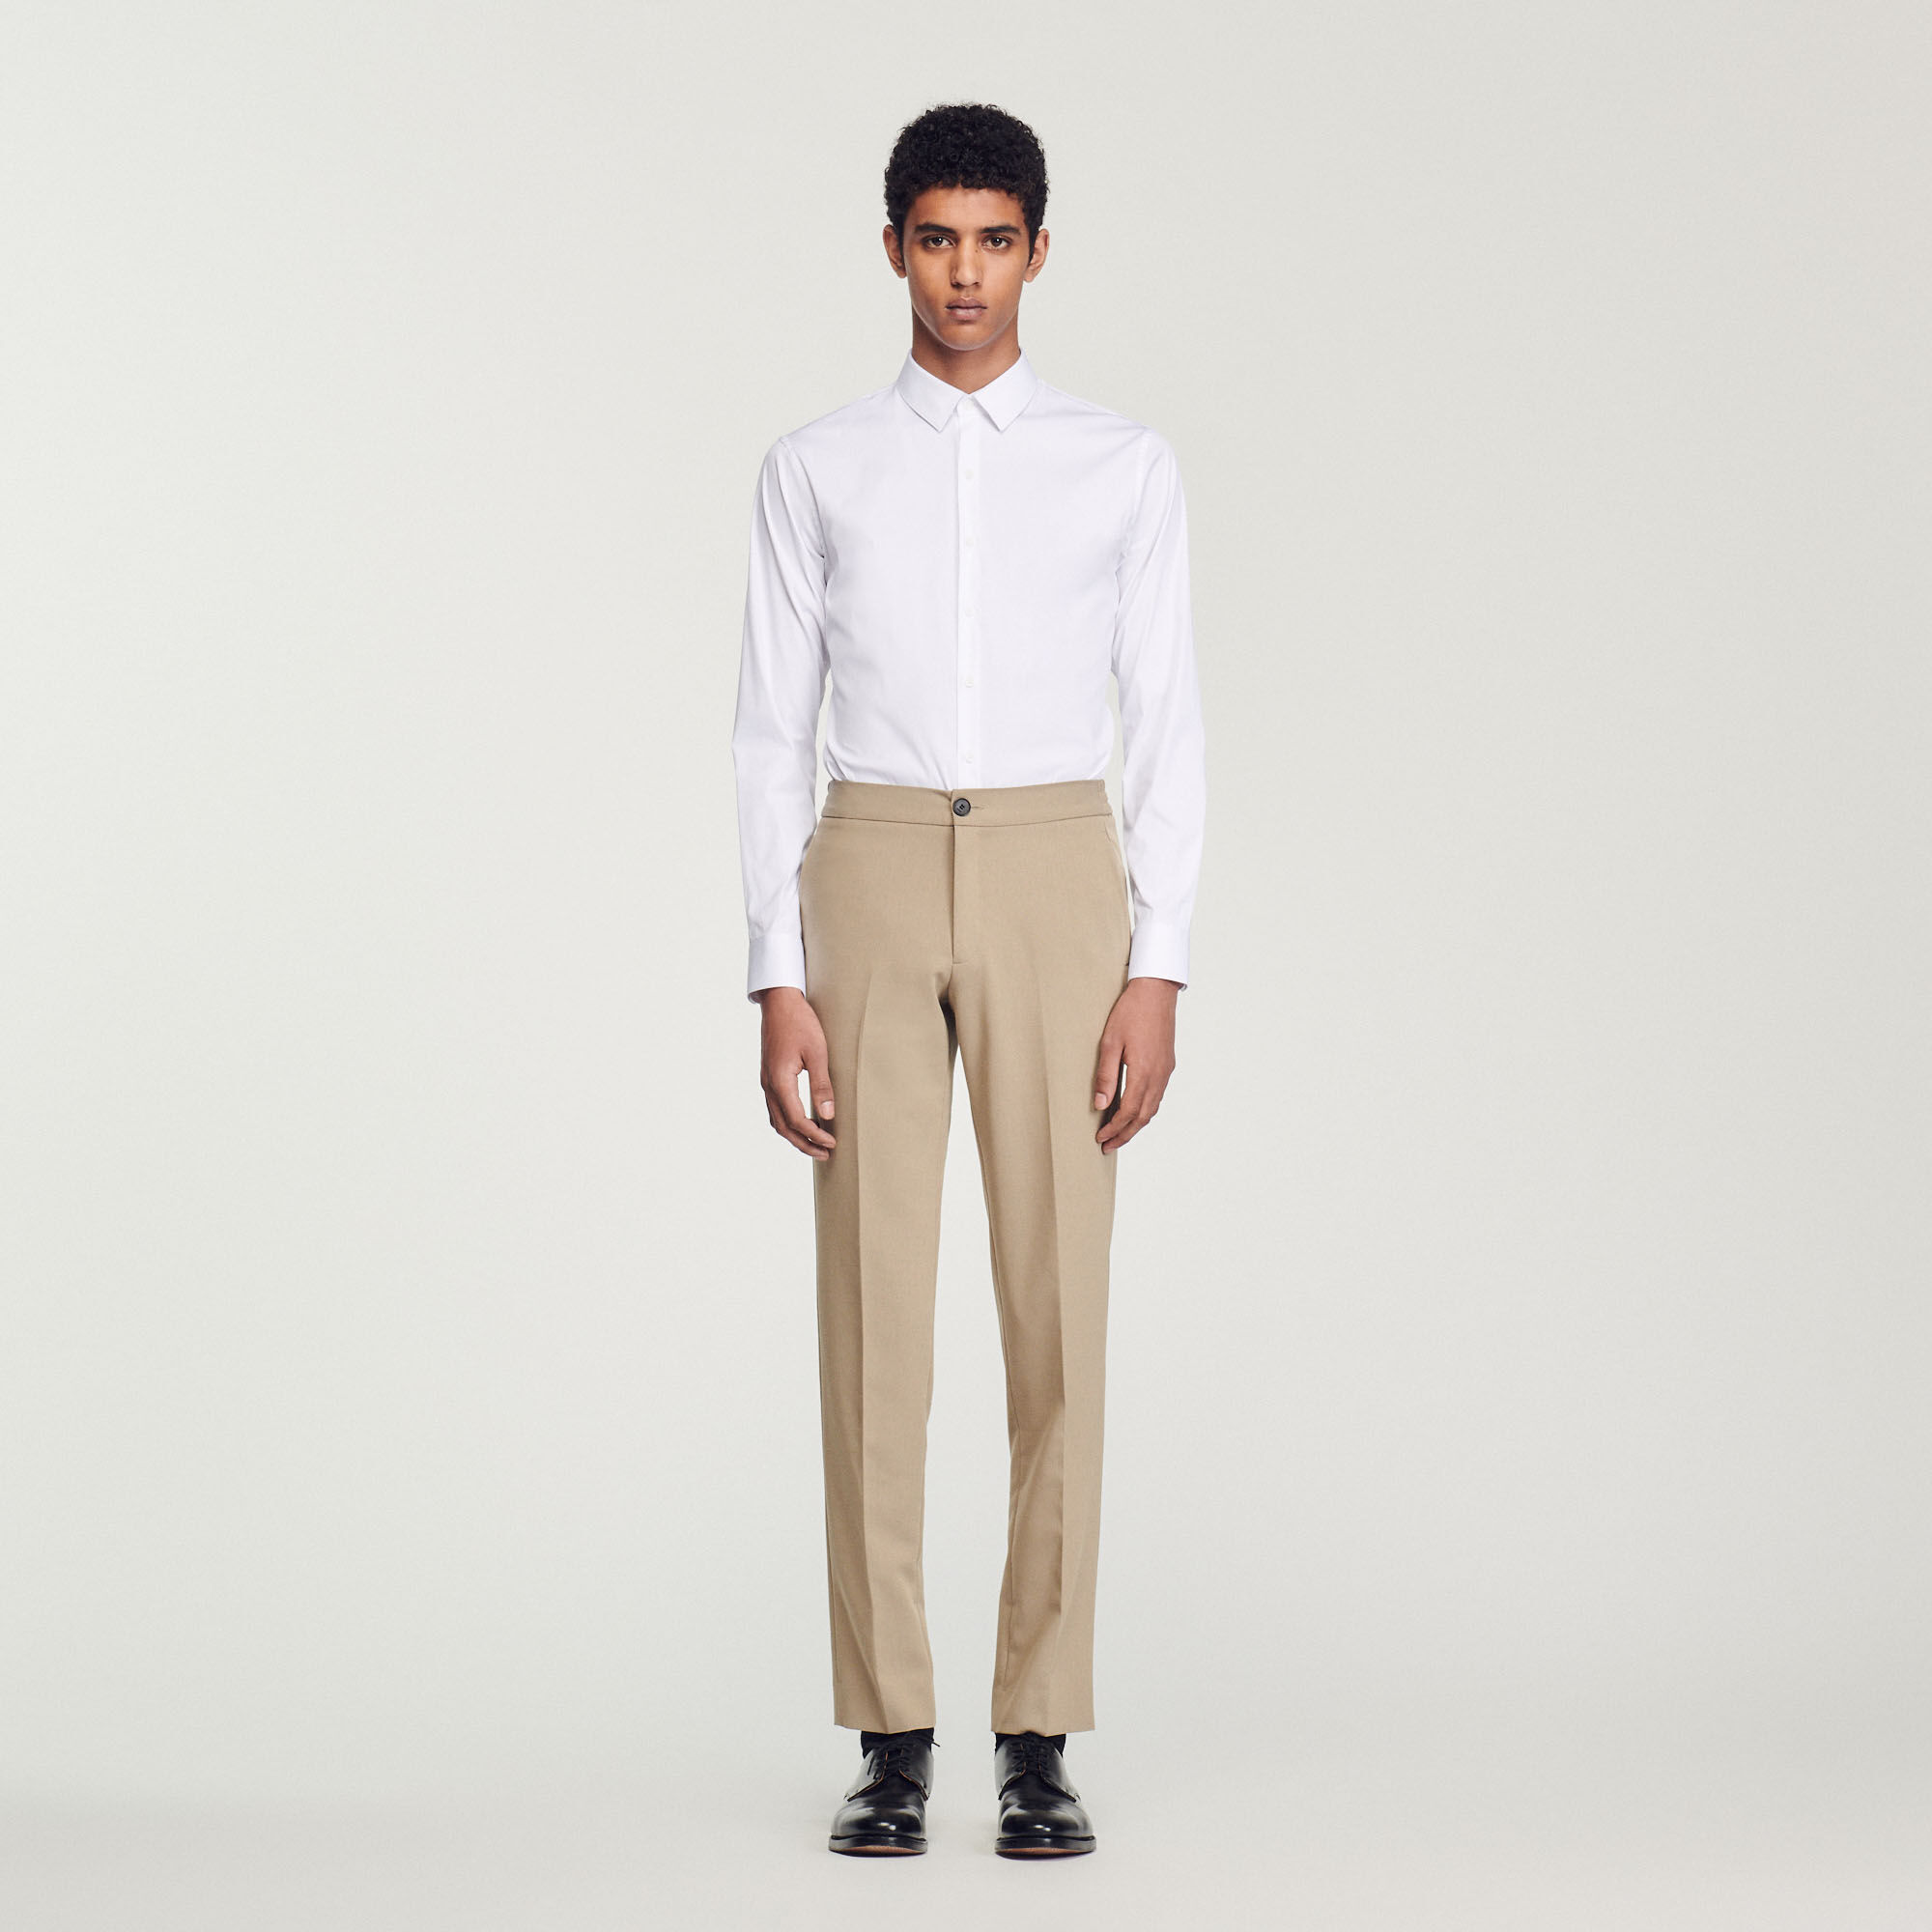 Pearl White Chinese Collar Shirt with Beige Contrast Detailing on Plac –  archerslounge